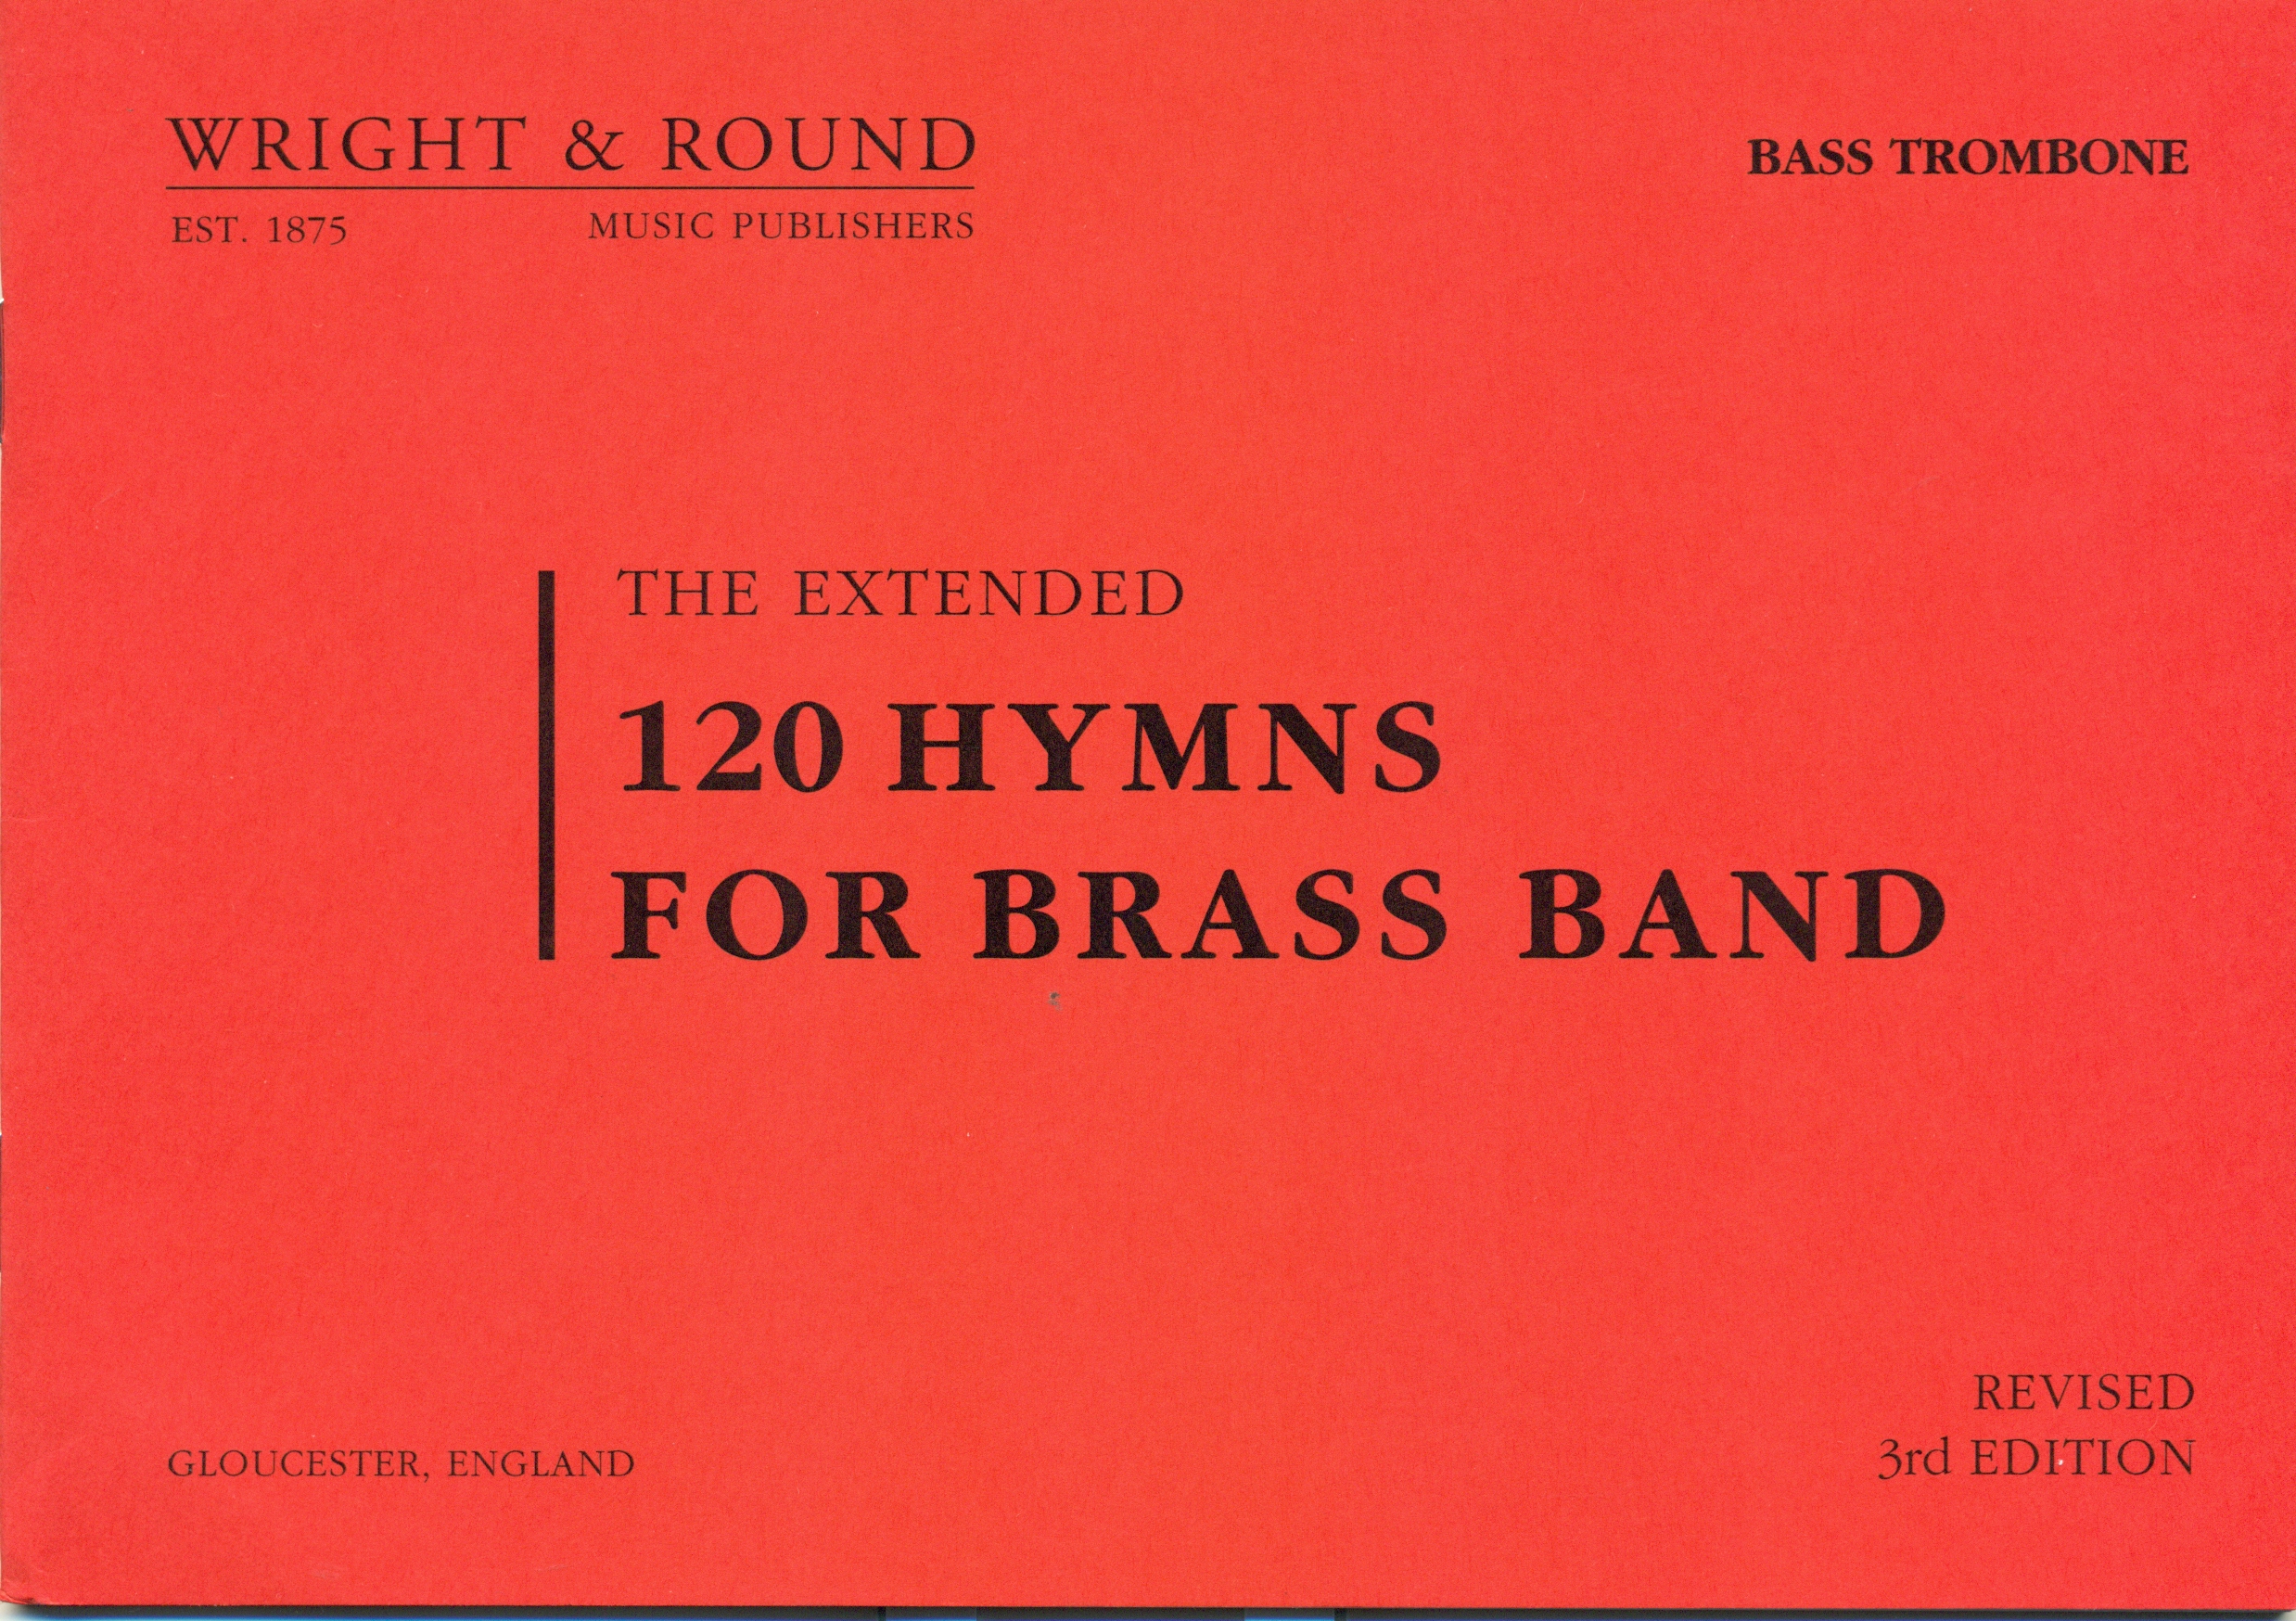 The Extended 120 Hymns for Brass Band – Bass Trombone